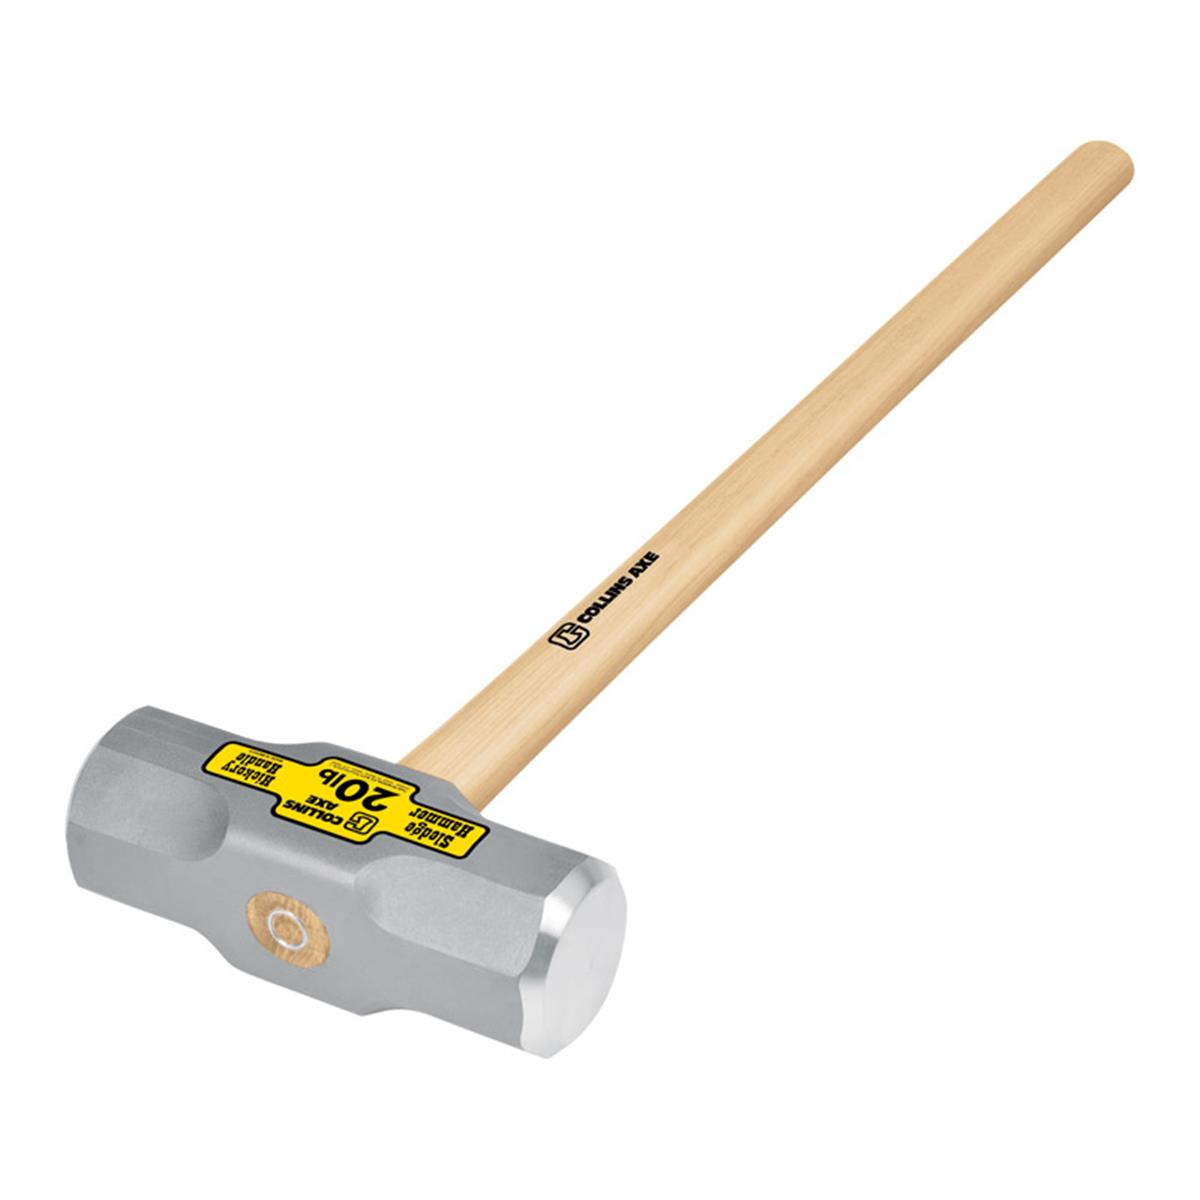 Md-20h-c32430 Double Face Sledge Collins Hammer